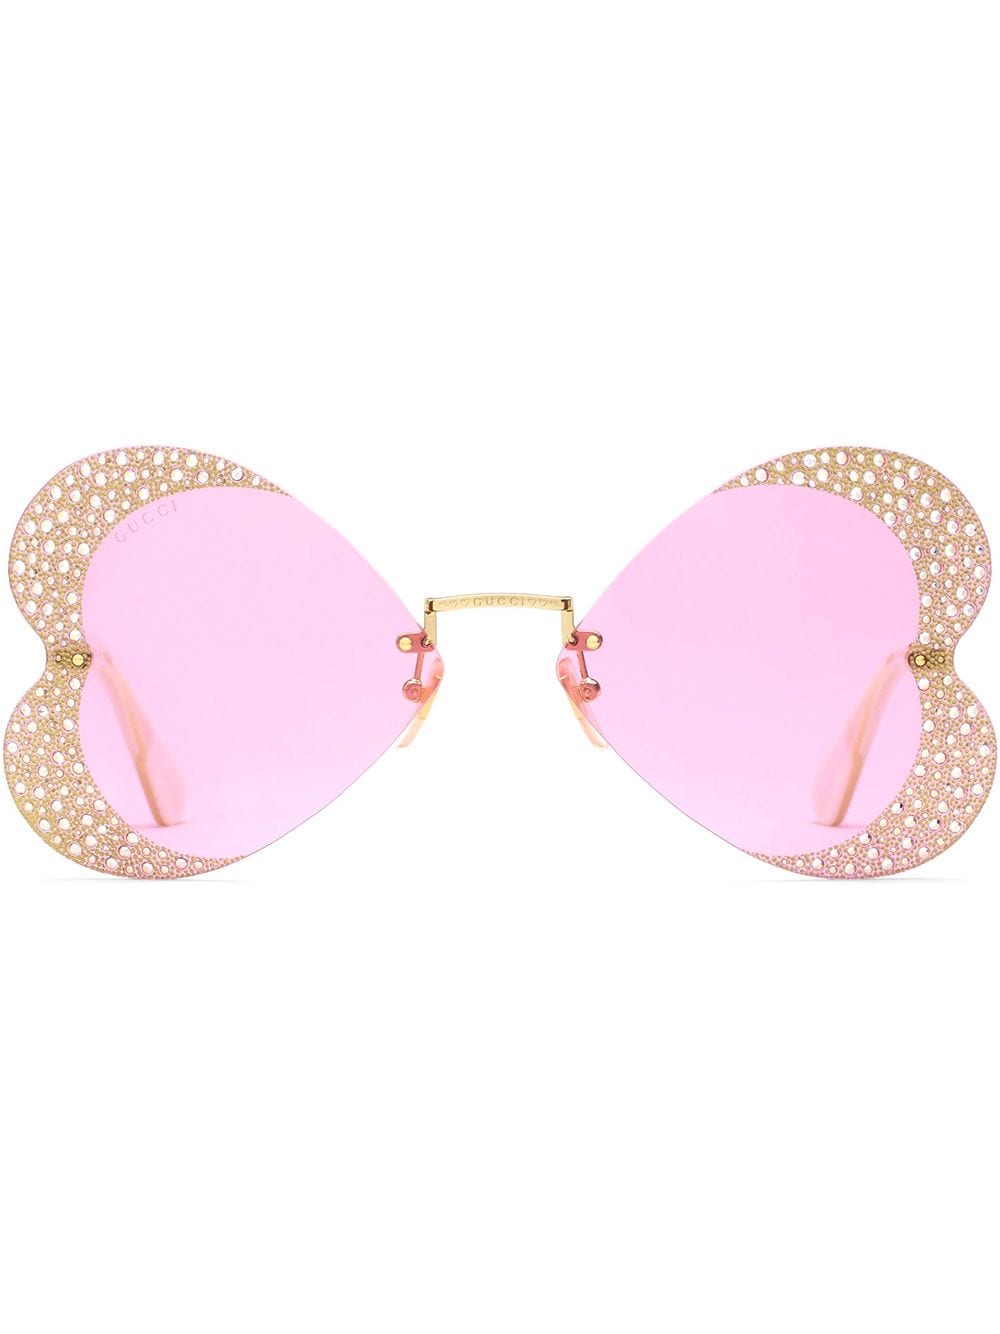 GUCCI CRYSTAL-ENCRUSTED HEART SUNGLASSES